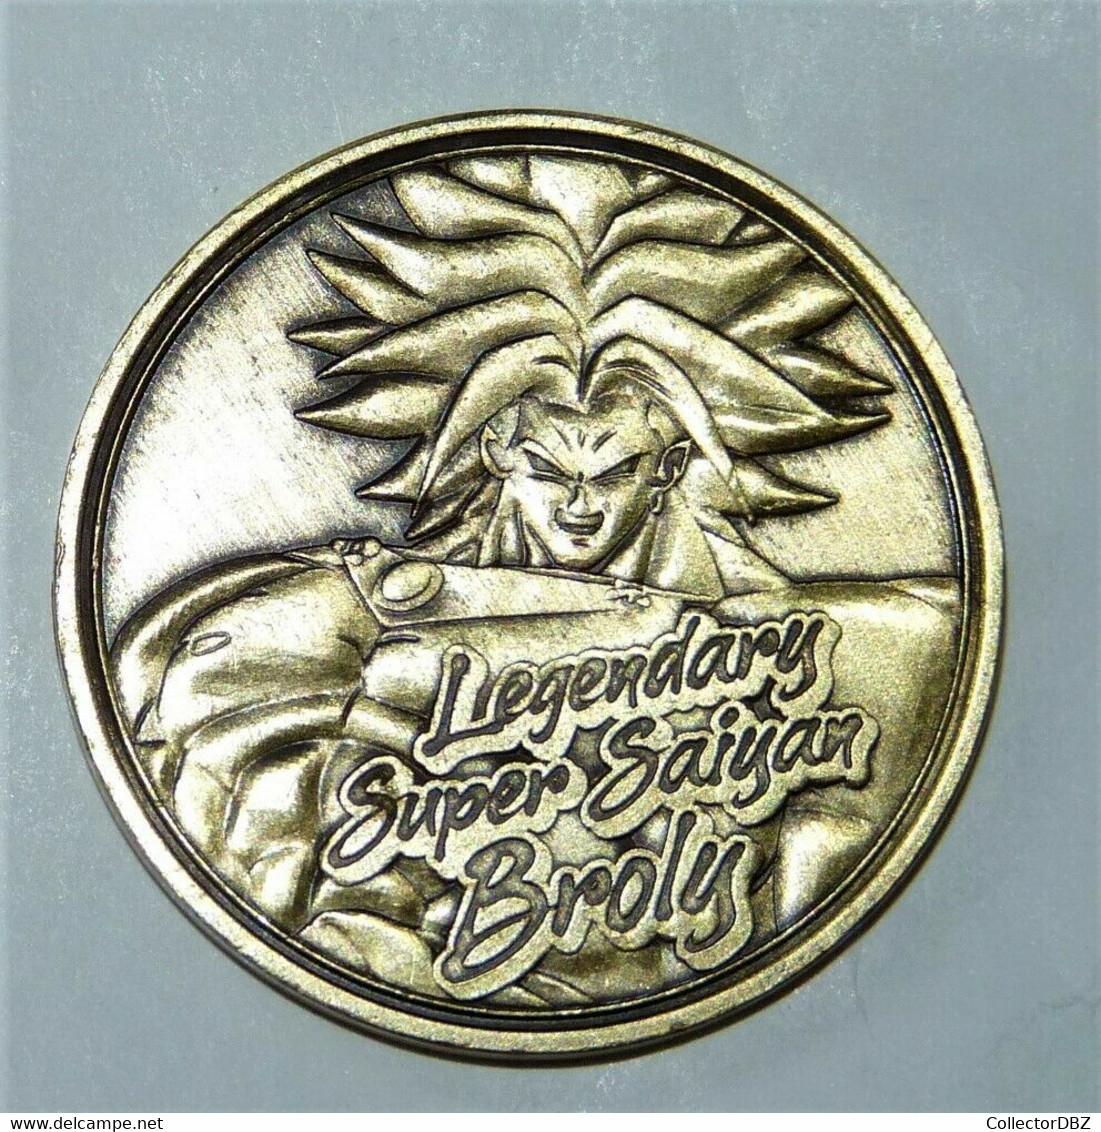 Dragon Ball Z Broly Cup Édition Limité Limited Collector Coin Pièce Officiel NeuF